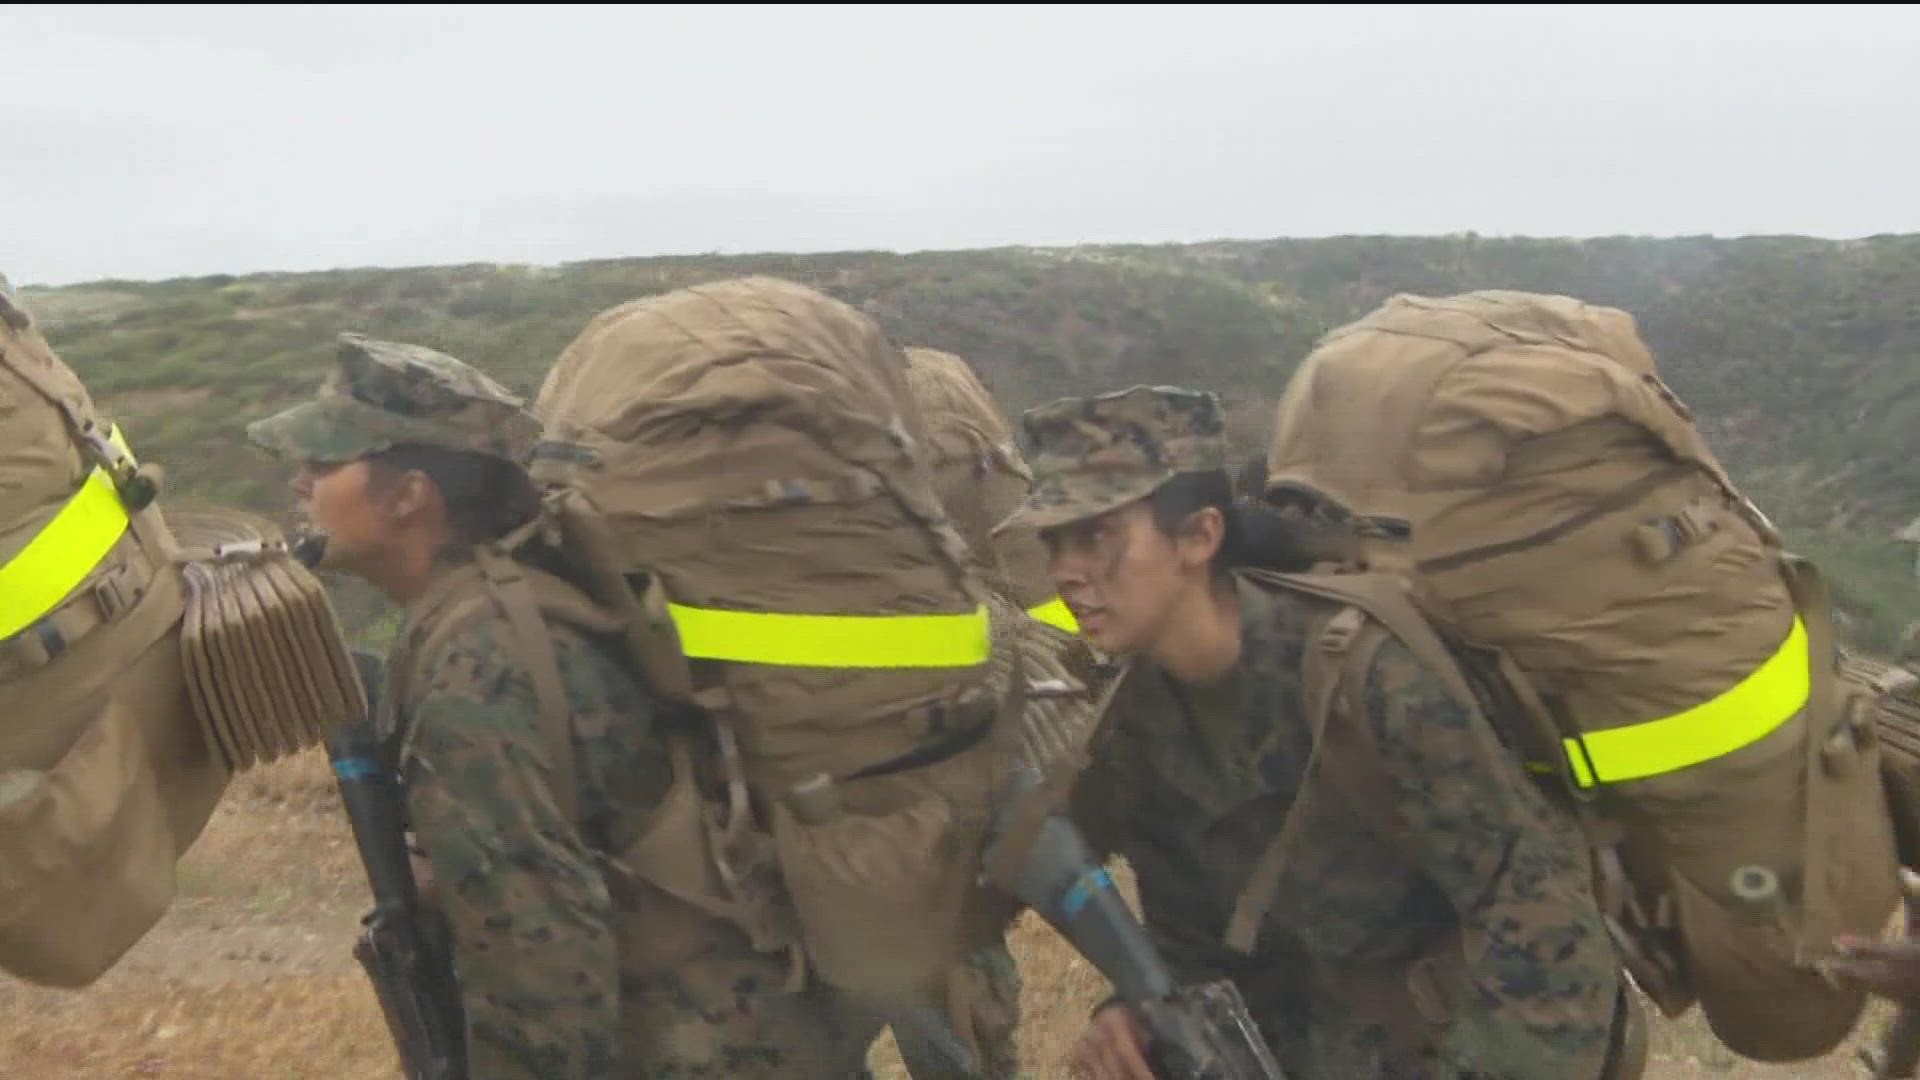 CBS 8's Abbie Alford reports on a Vista non-profit changing the narrative and empowering female veterans.